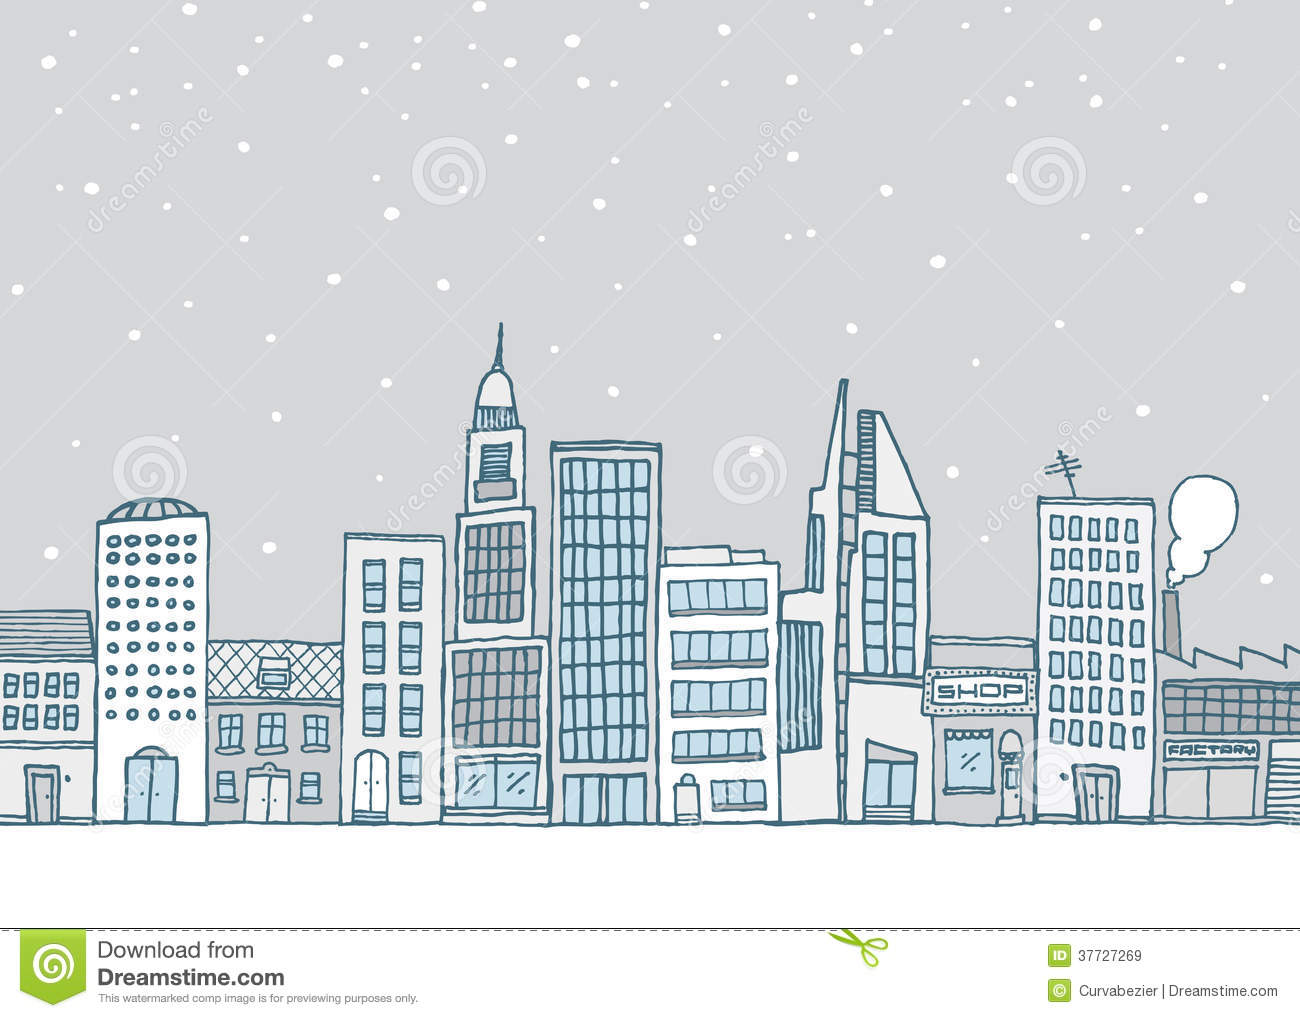 White Urban Landscape In Snowy Weather Royalty Free Stock Images    